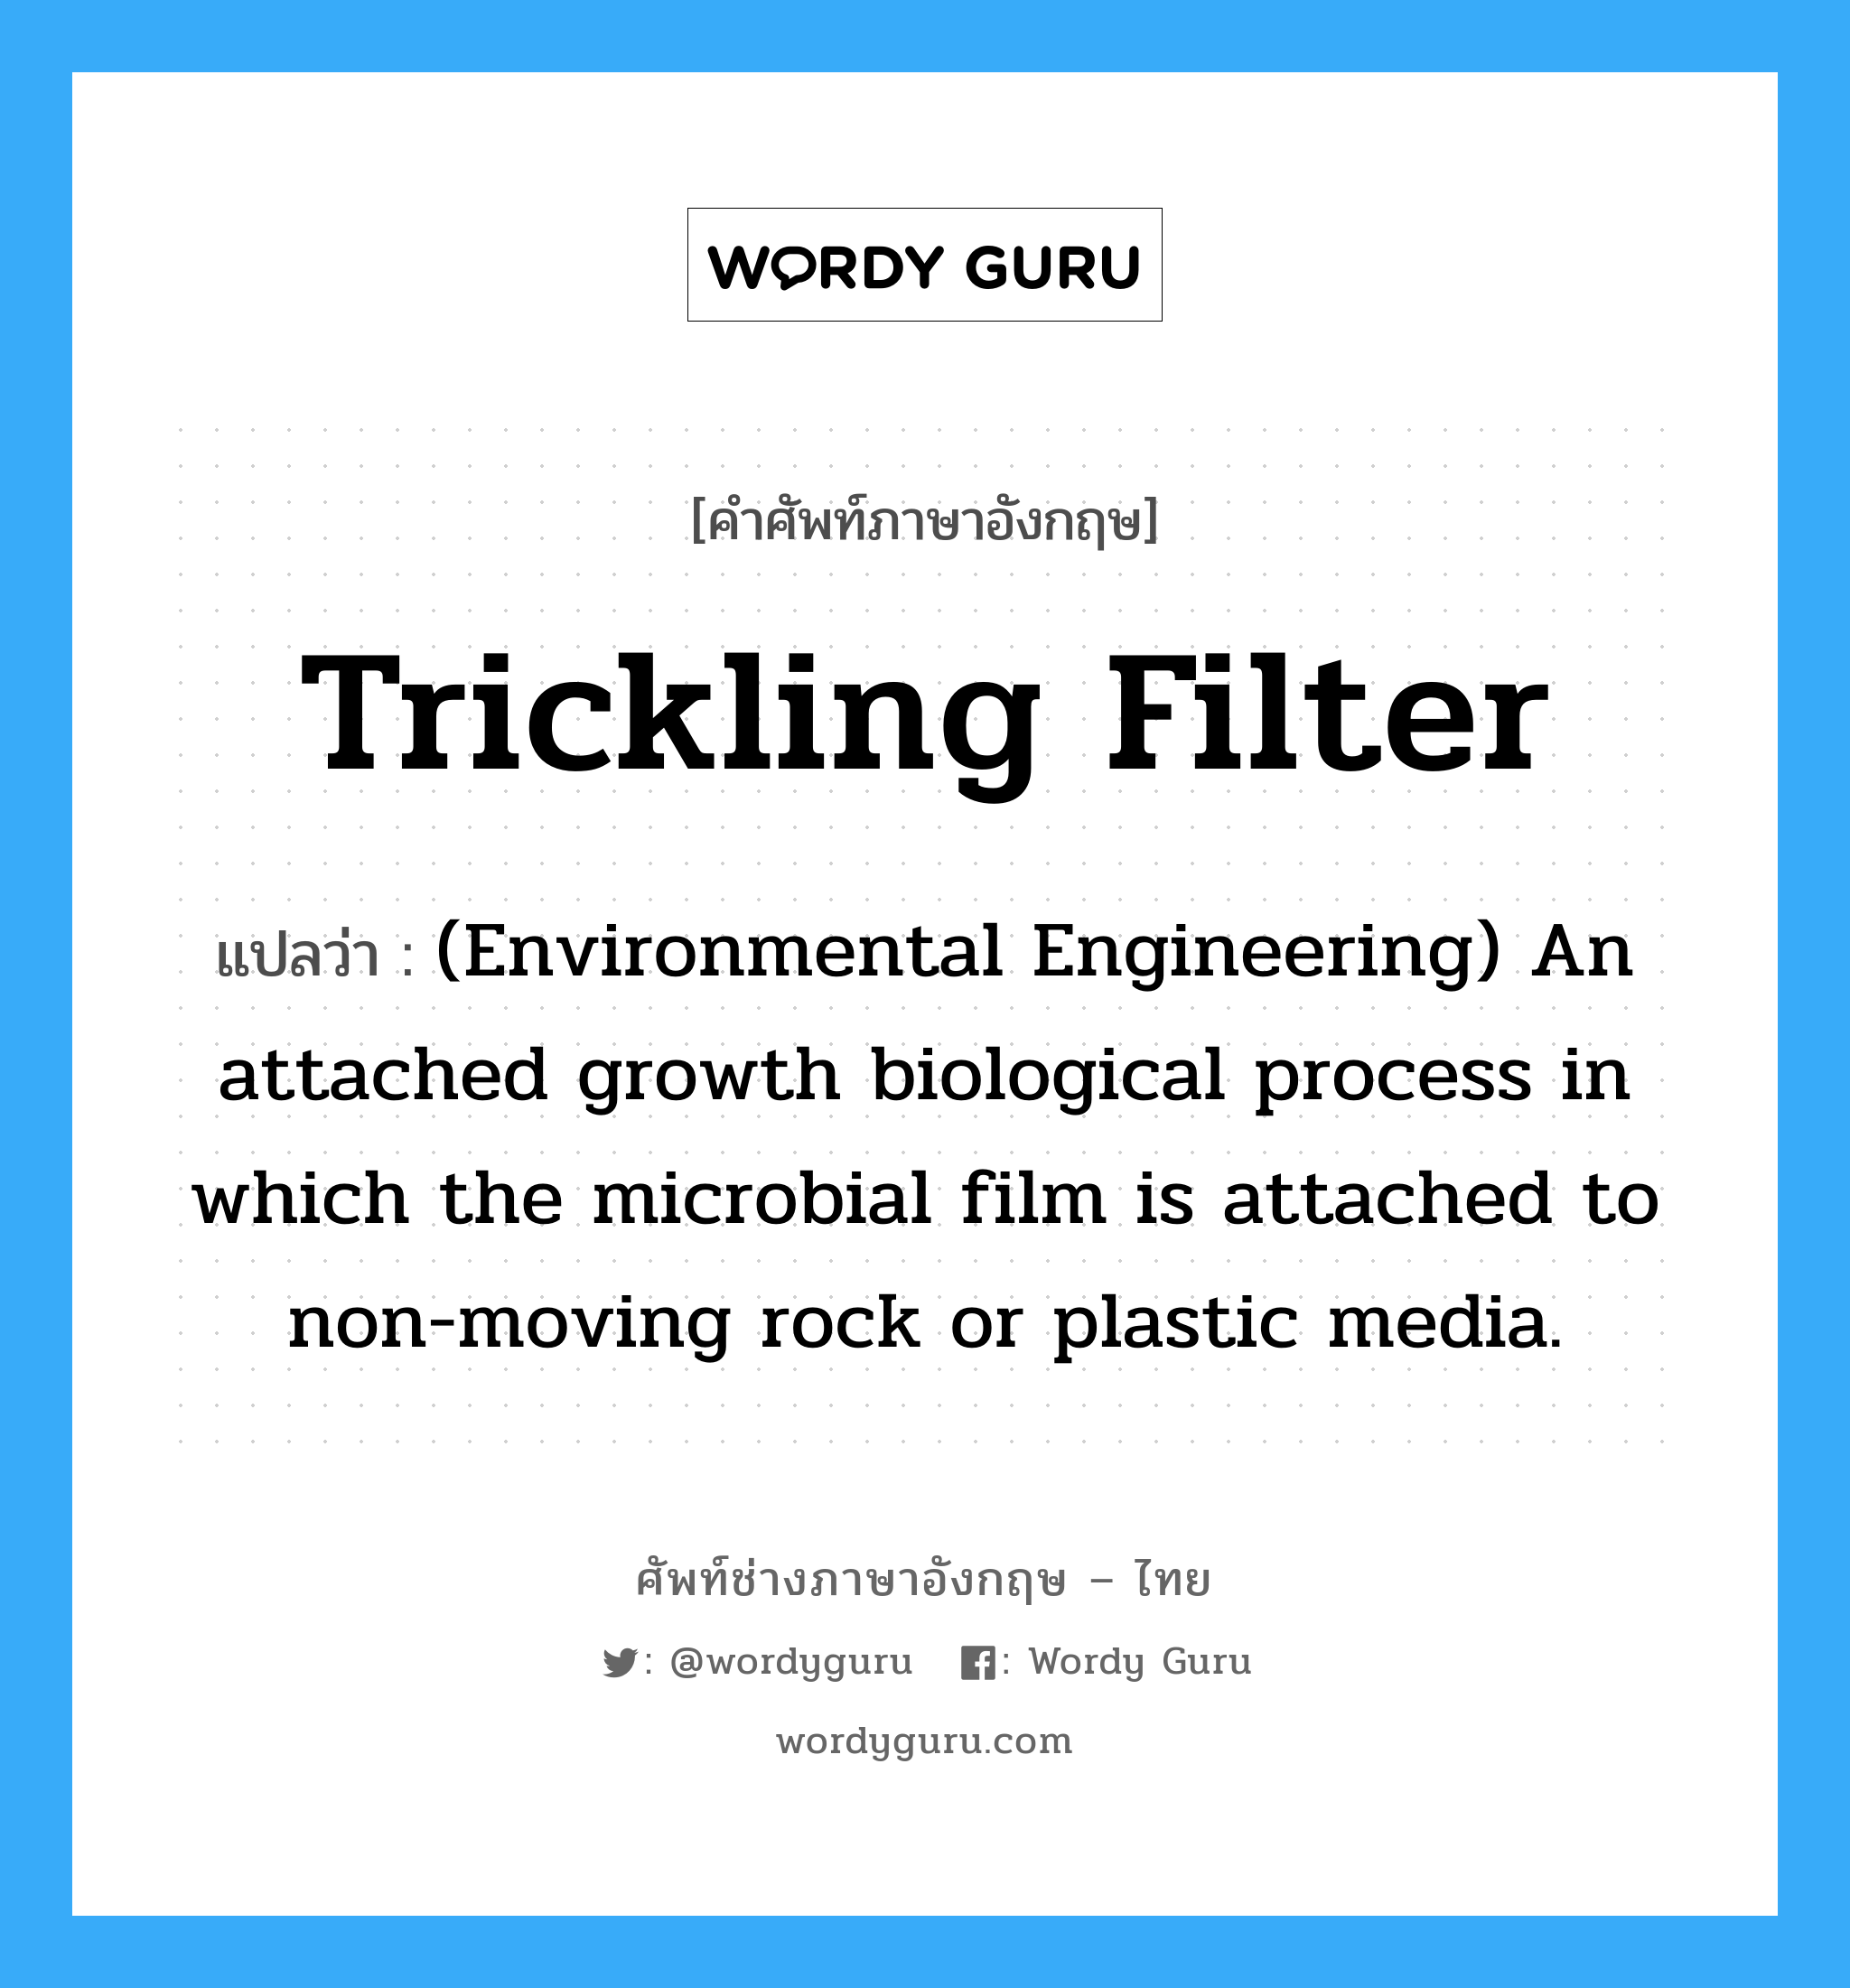 (Environmental Engineering) An attached growth biological process in which the microbial film is attached to non-moving rock or plastic media. ภาษาอังกฤษ?, คำศัพท์ช่างภาษาอังกฤษ - ไทย (Environmental Engineering) An attached growth biological process in which the microbial film is attached to non-moving rock or plastic media. คำศัพท์ภาษาอังกฤษ (Environmental Engineering) An attached growth biological process in which the microbial film is attached to non-moving rock or plastic media. แปลว่า Trickling filter